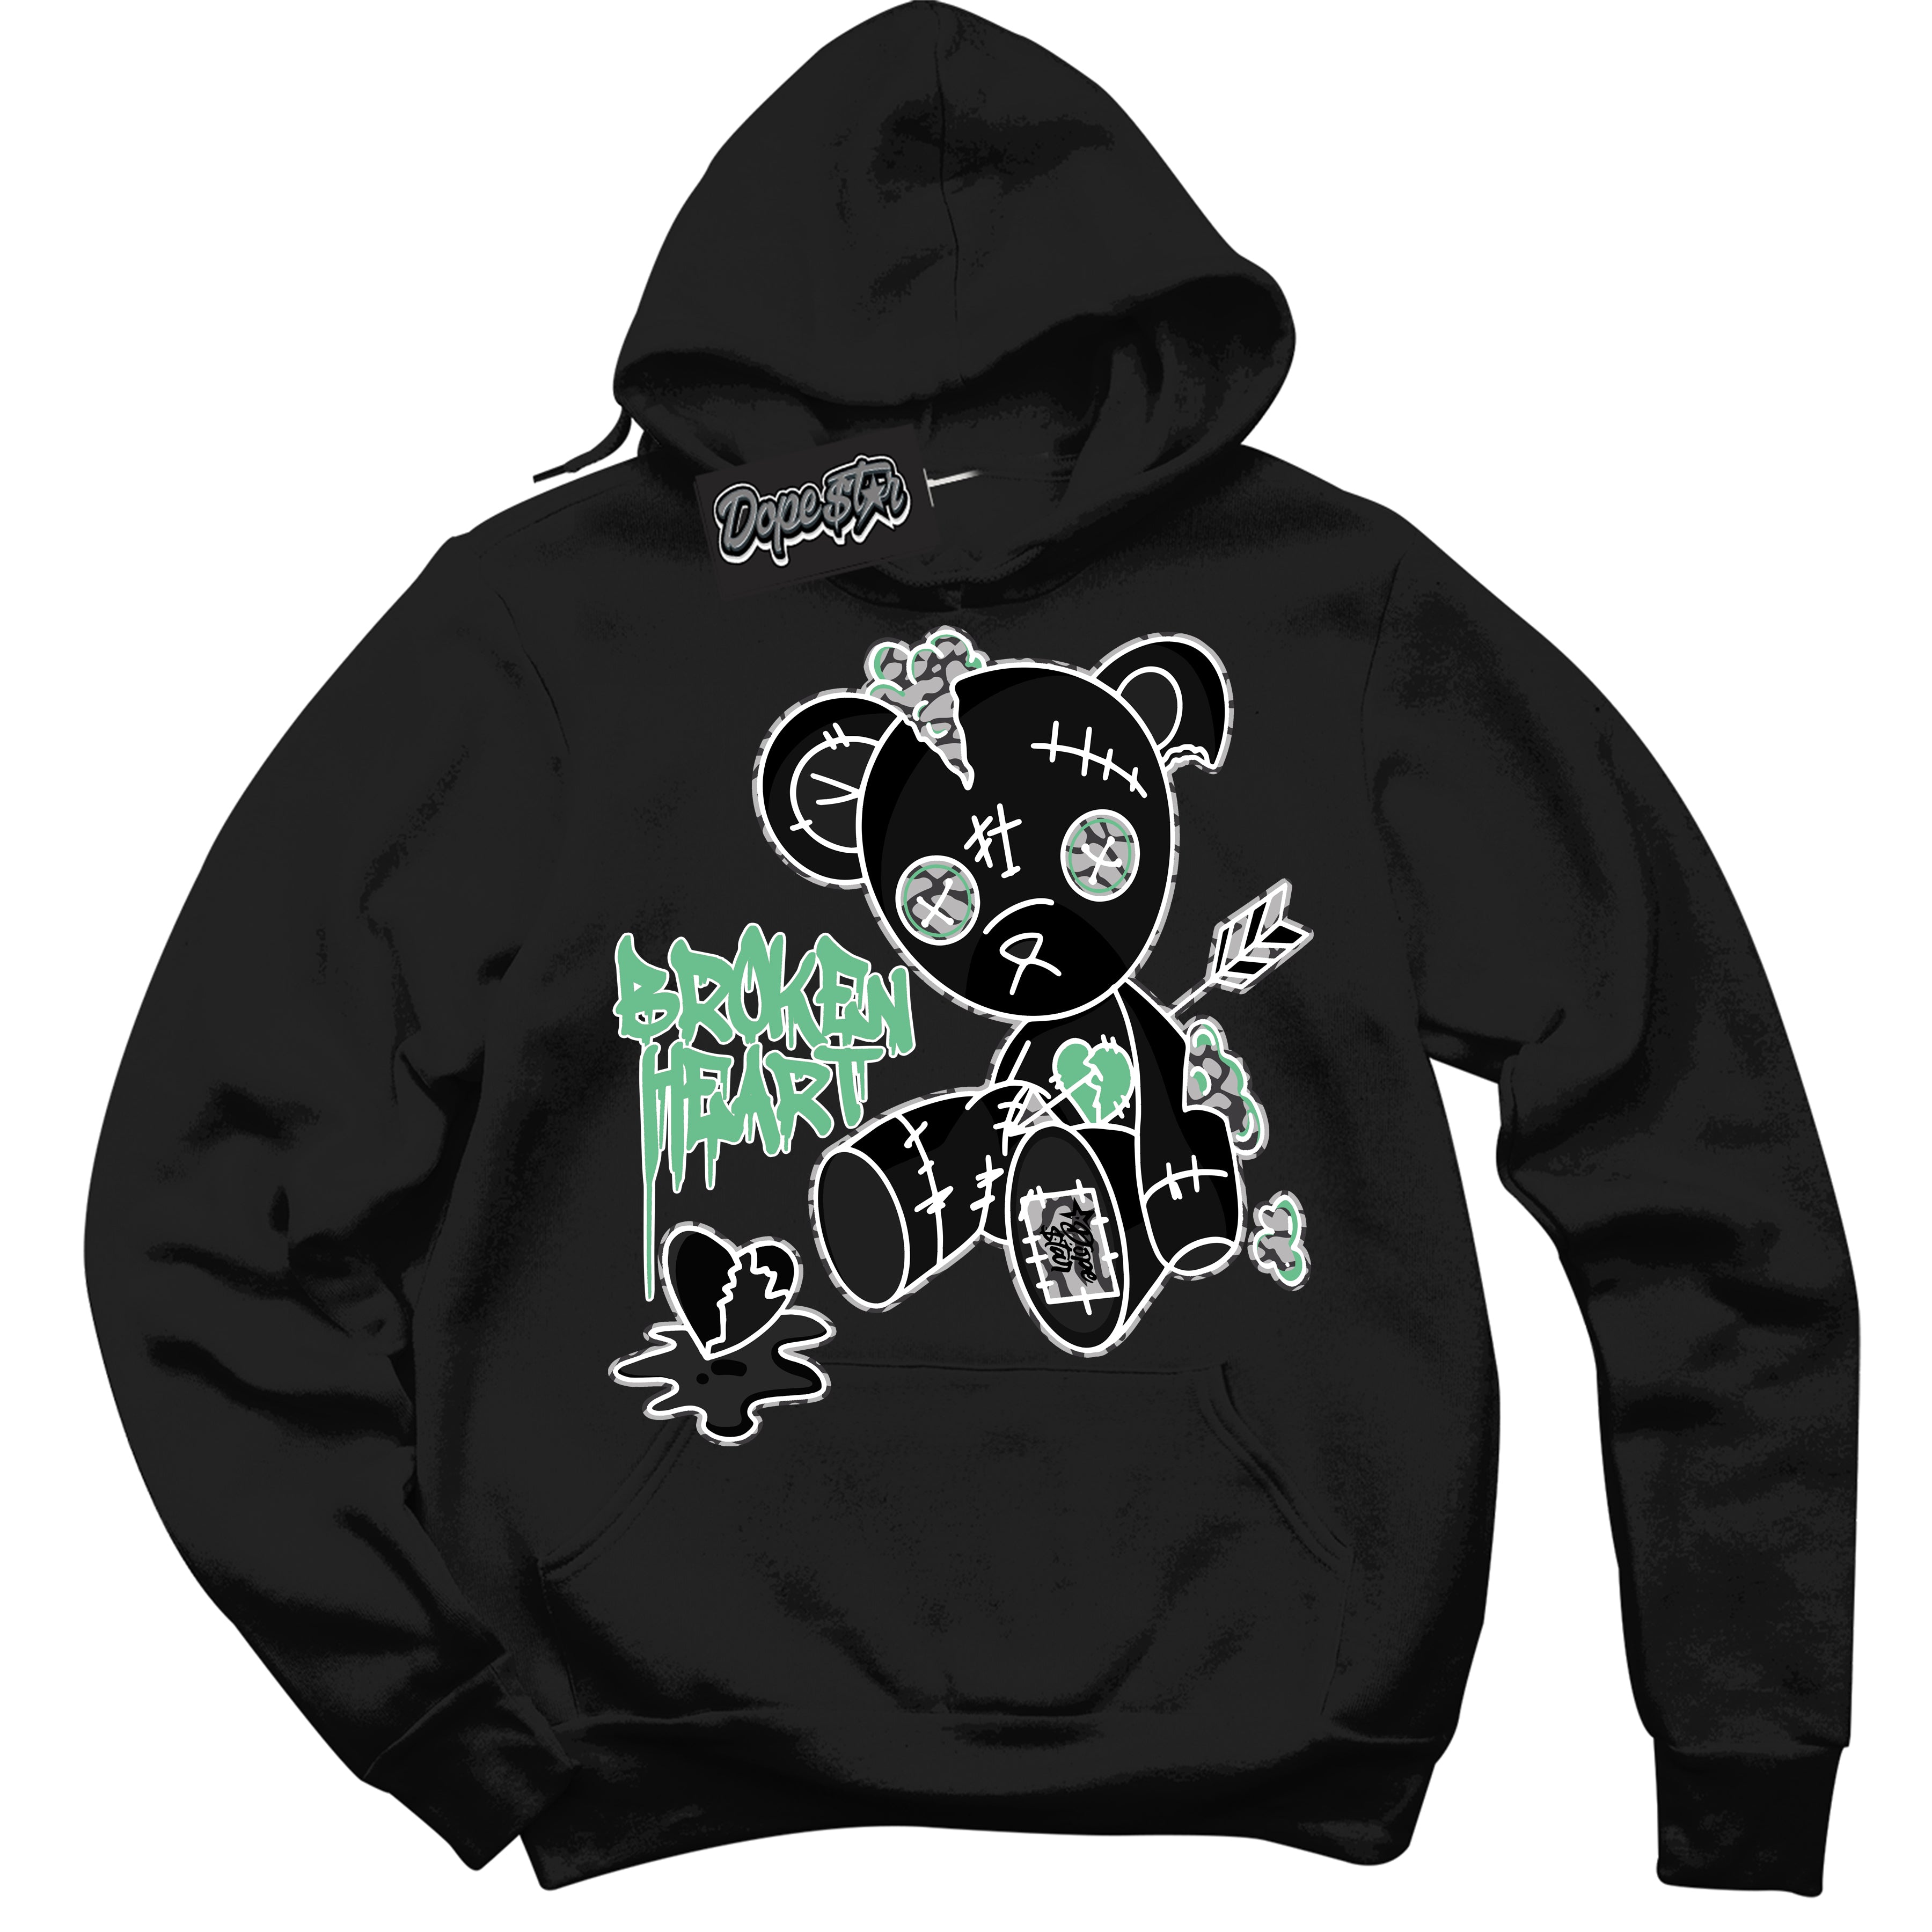 Cool Black Graphic DopeStar Hoodie with “ Broken Heart Bear “ print, that perfectly matches Green Glow 3S sneakers